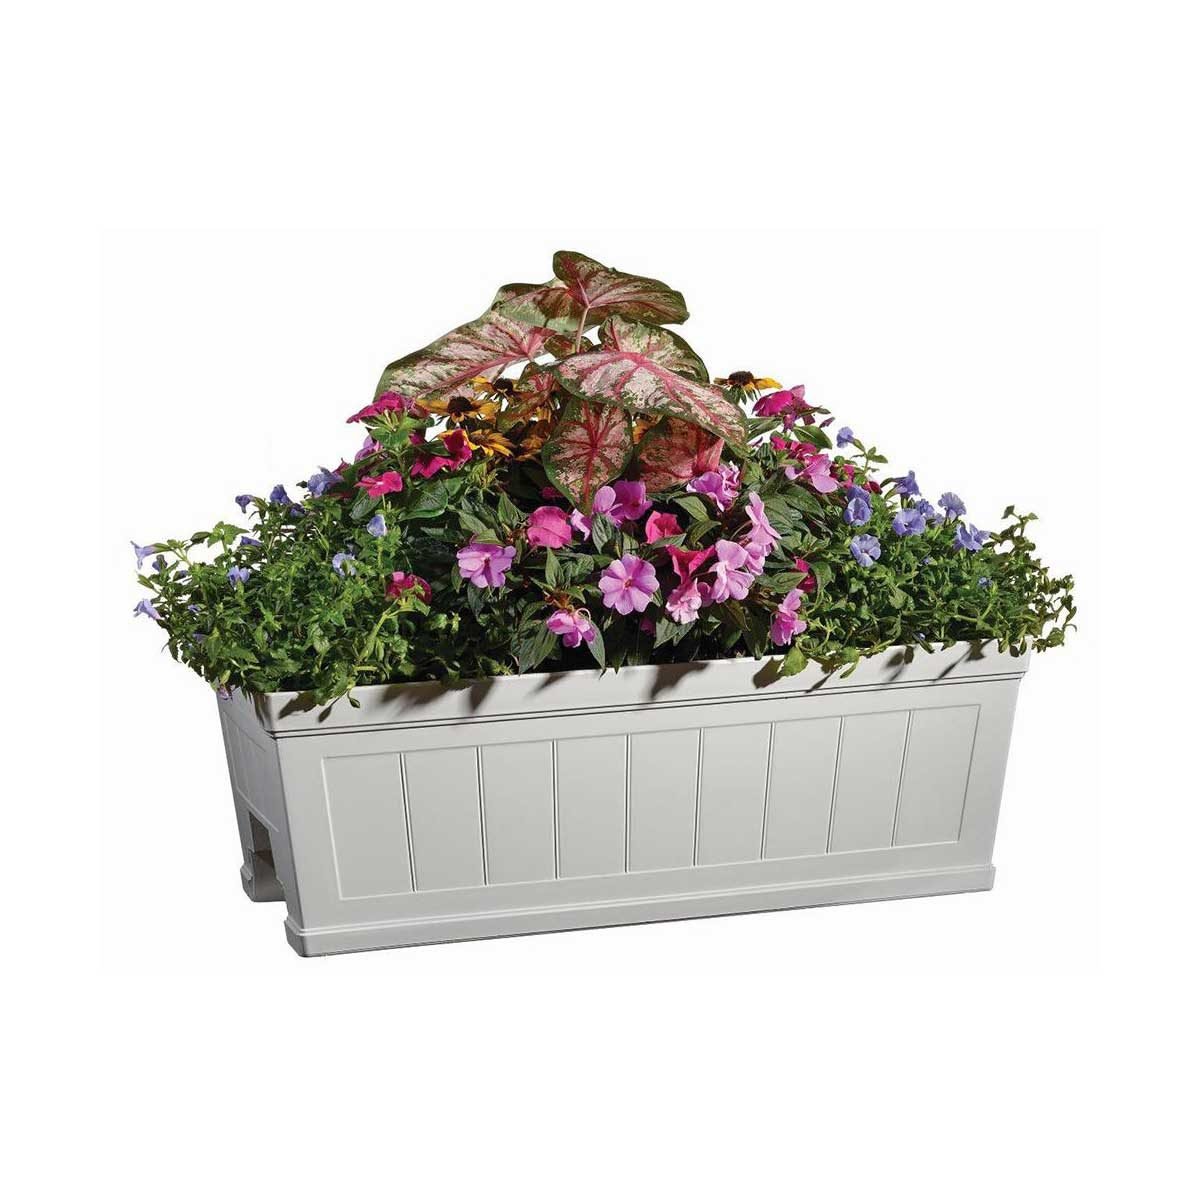 11 Flower Boxes That Add Curb Appeal to Your Home | Family Handyman